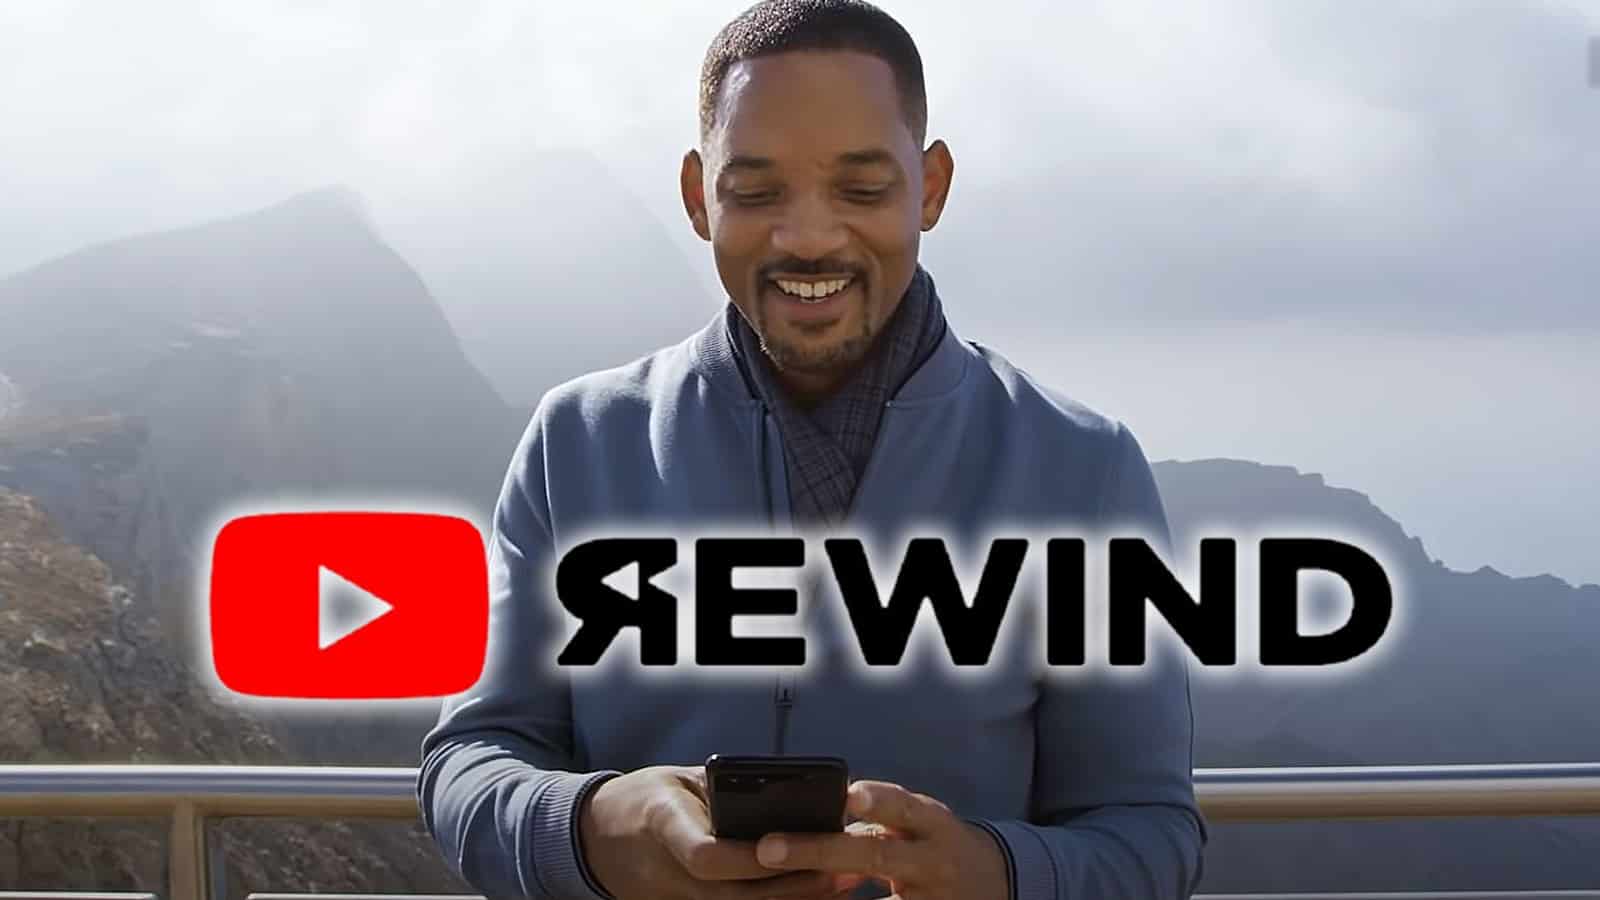 YouTube cancels YouTube Rewind after 10 years